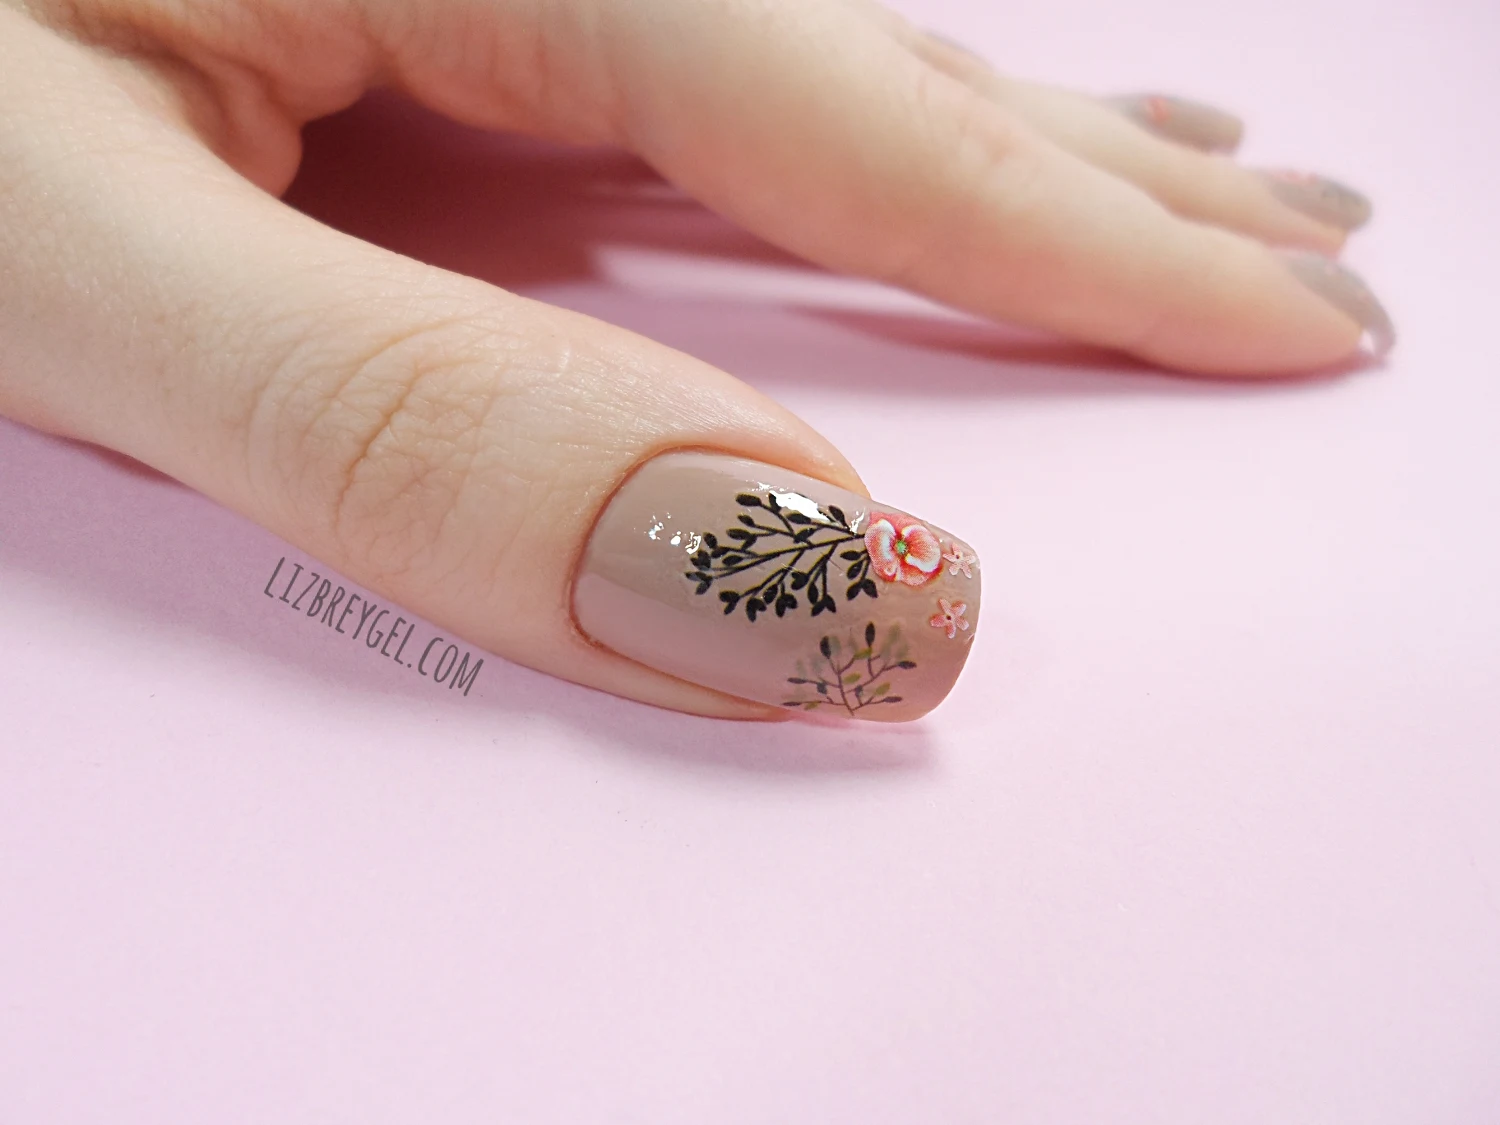 close-up of floral nail stickers on rosy background